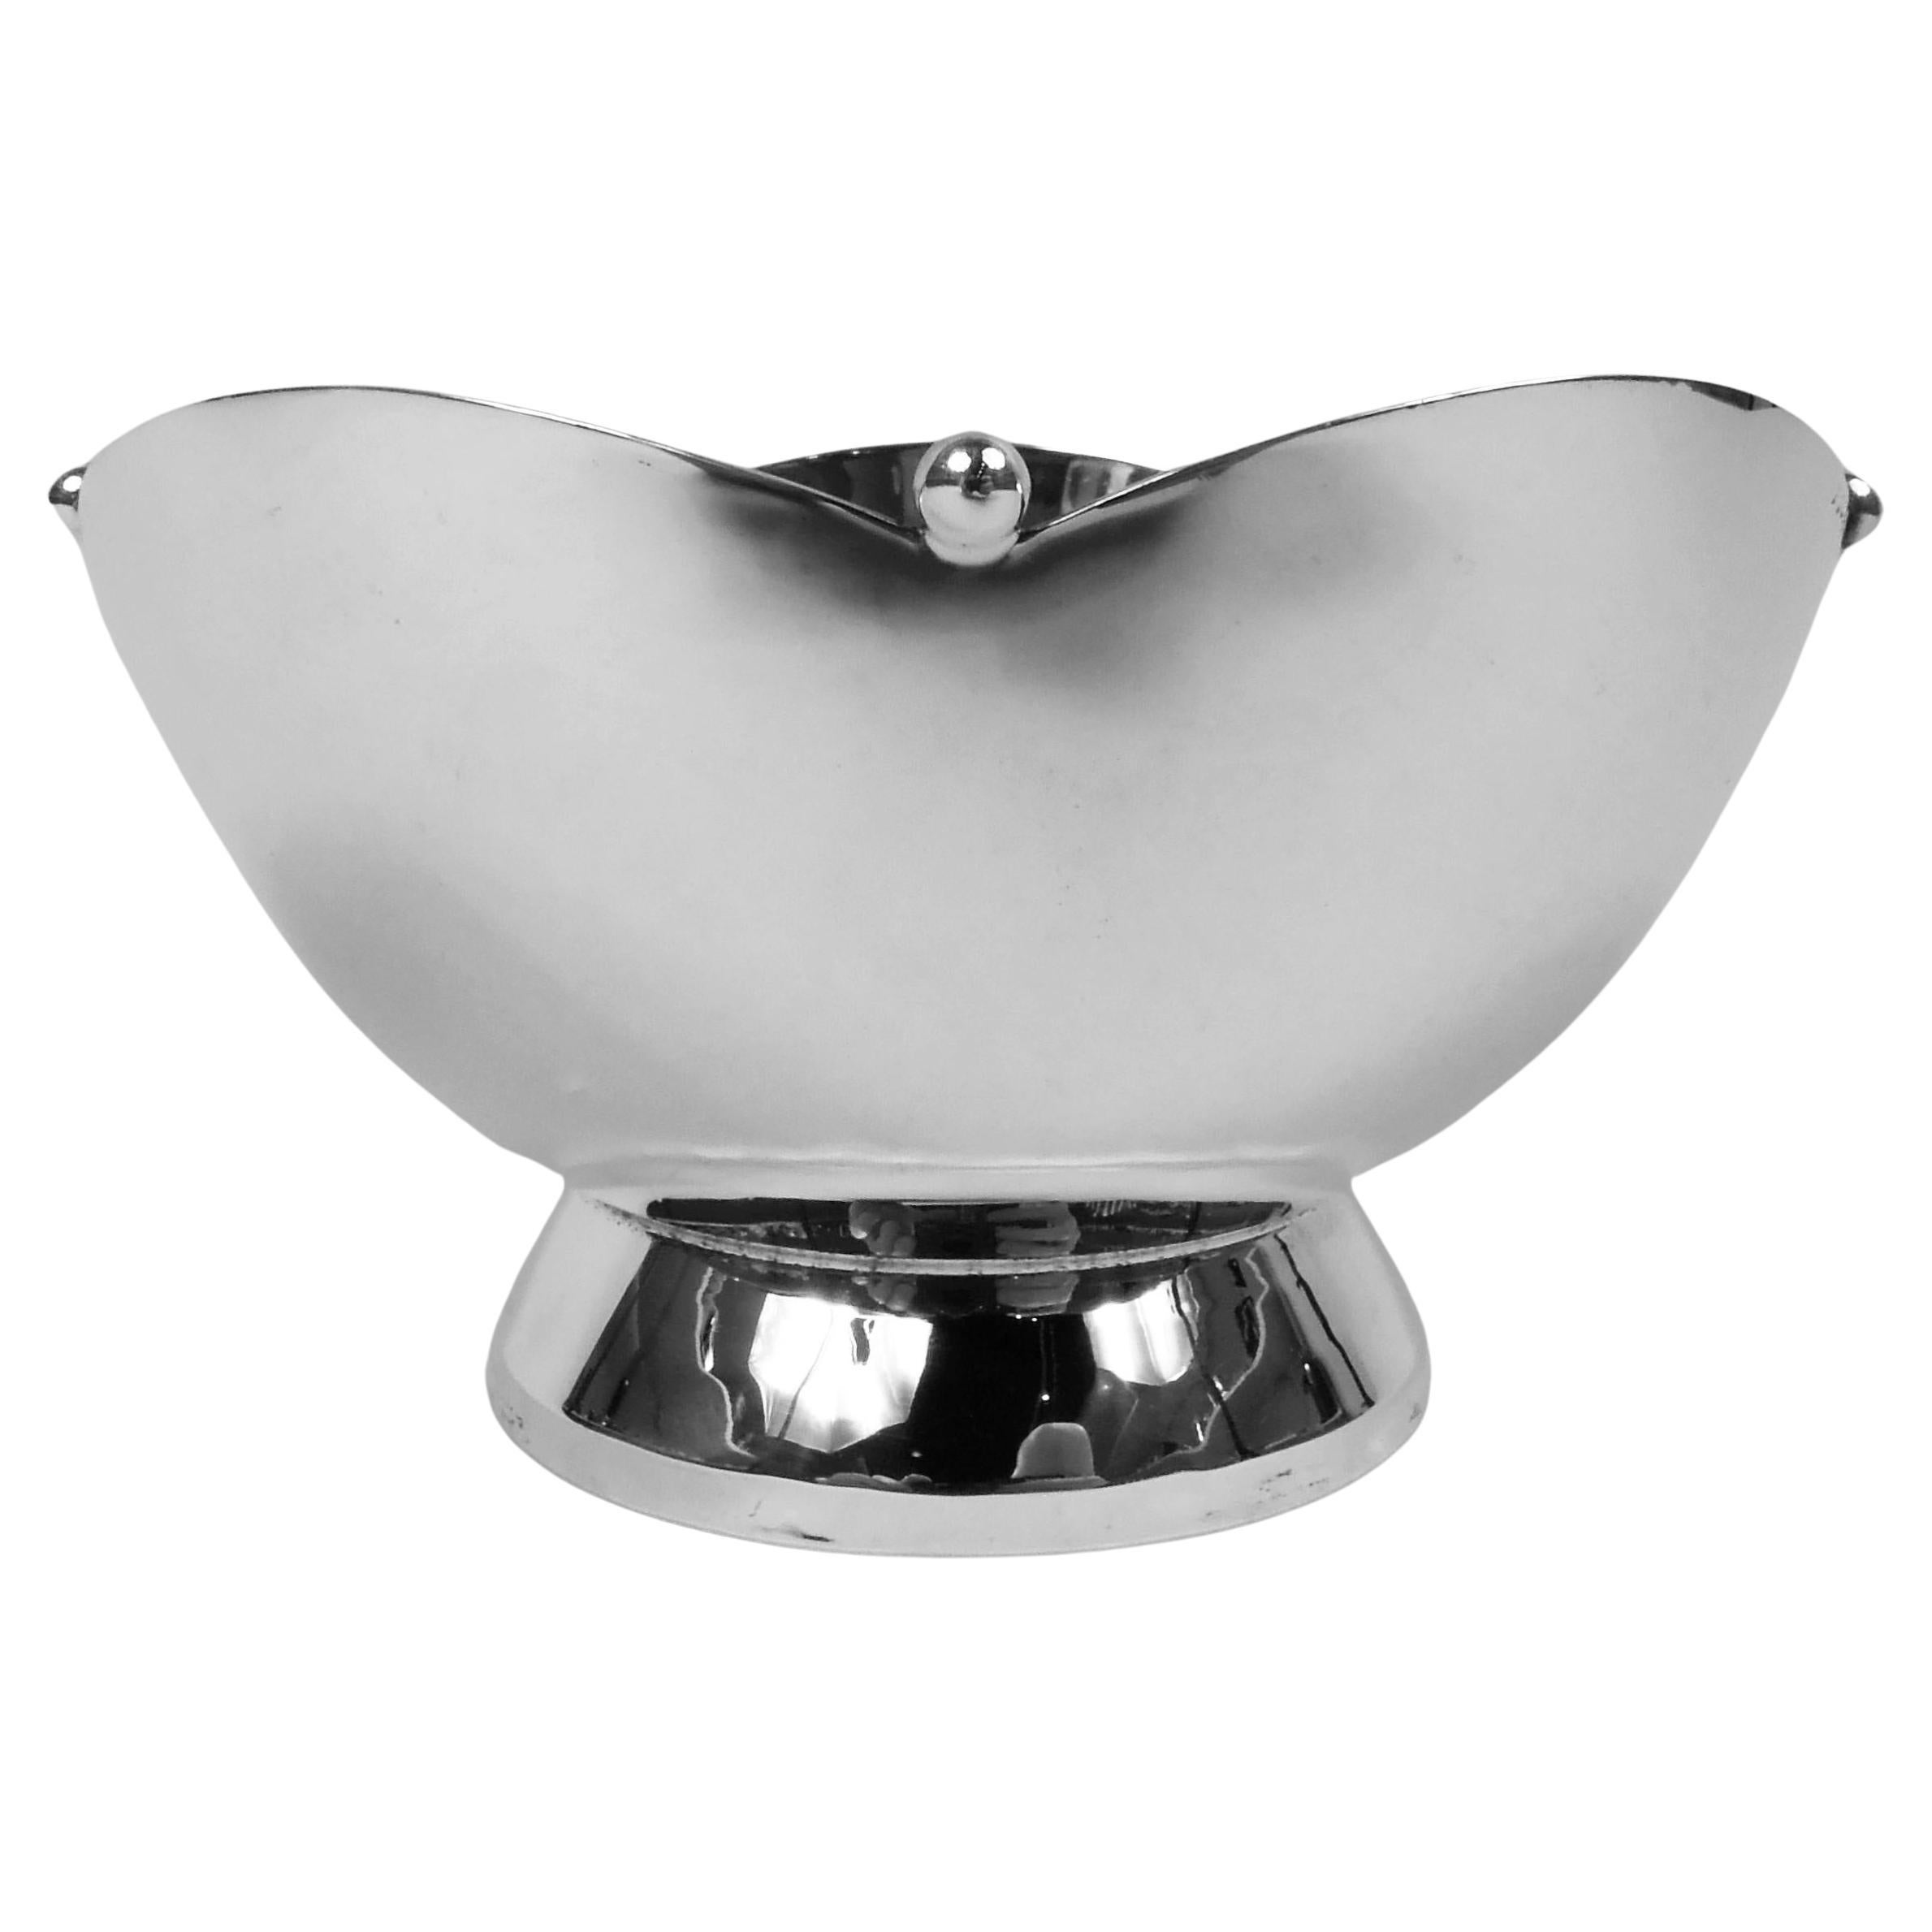 Cartier American Art Deco Sterling Silver Bowl For Sale